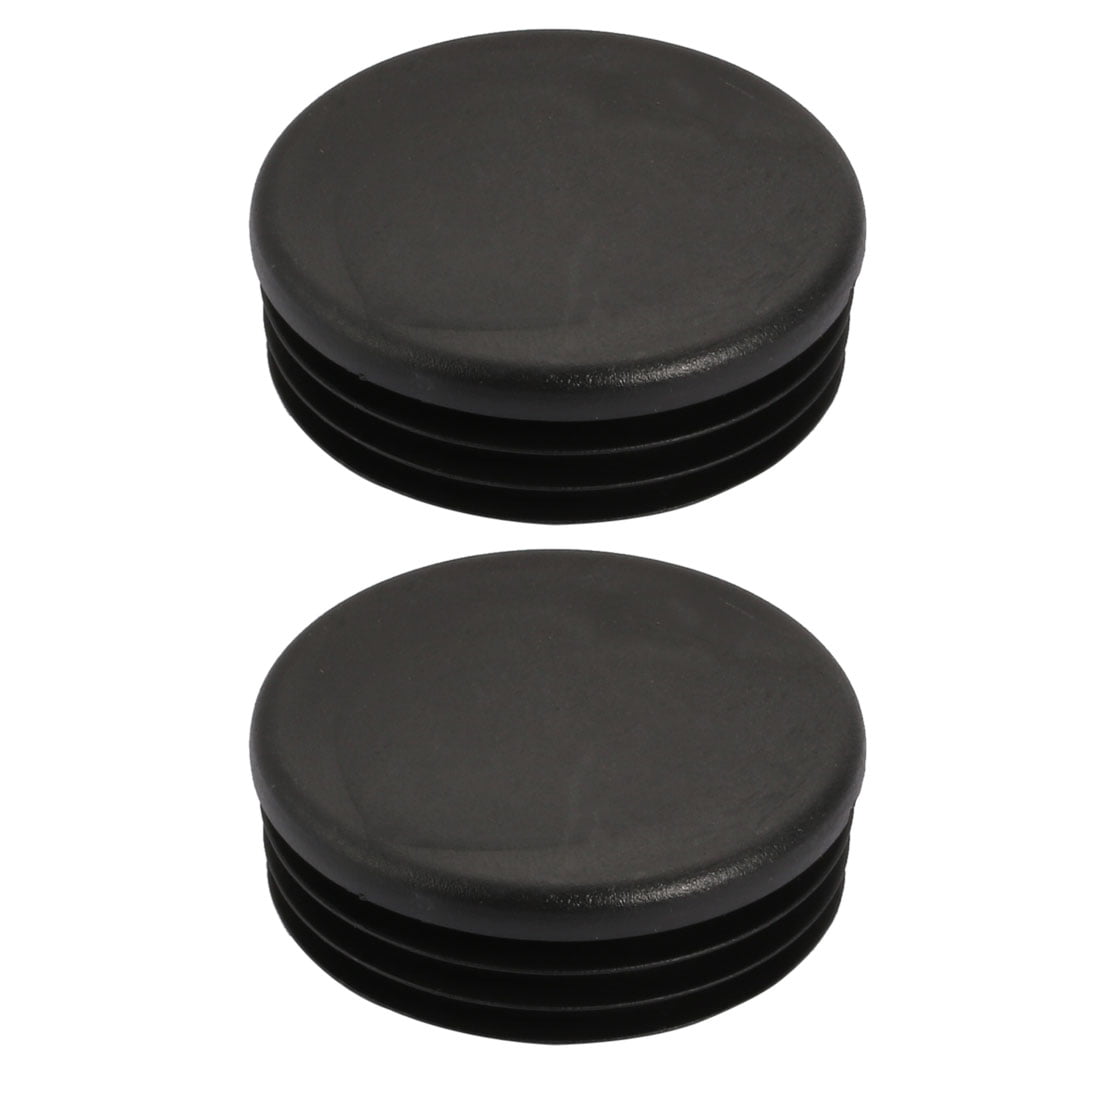 sourcingmap 2 Pcs Chair Table Leg Plastic Cap Round Tube Insert Fit 60mm Pipe Outer Dia 